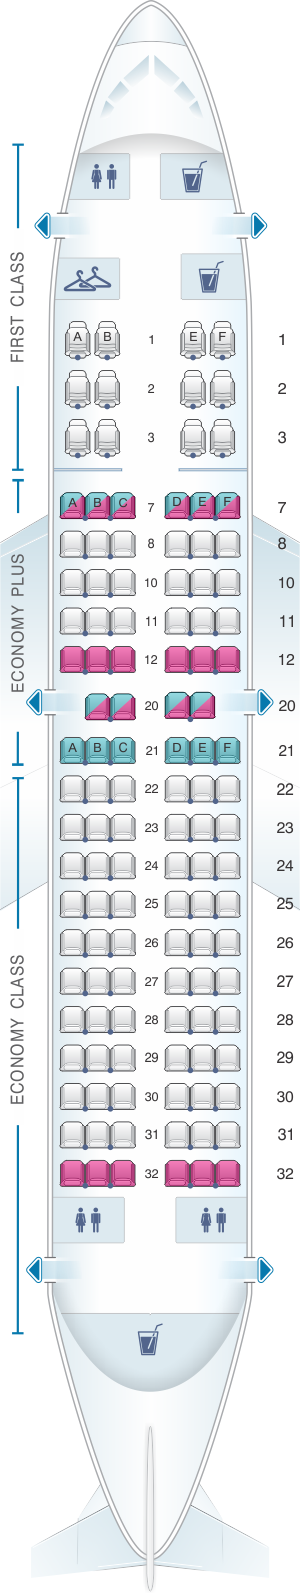 Seat map for United Airlines Boeing B737 700 - version 1